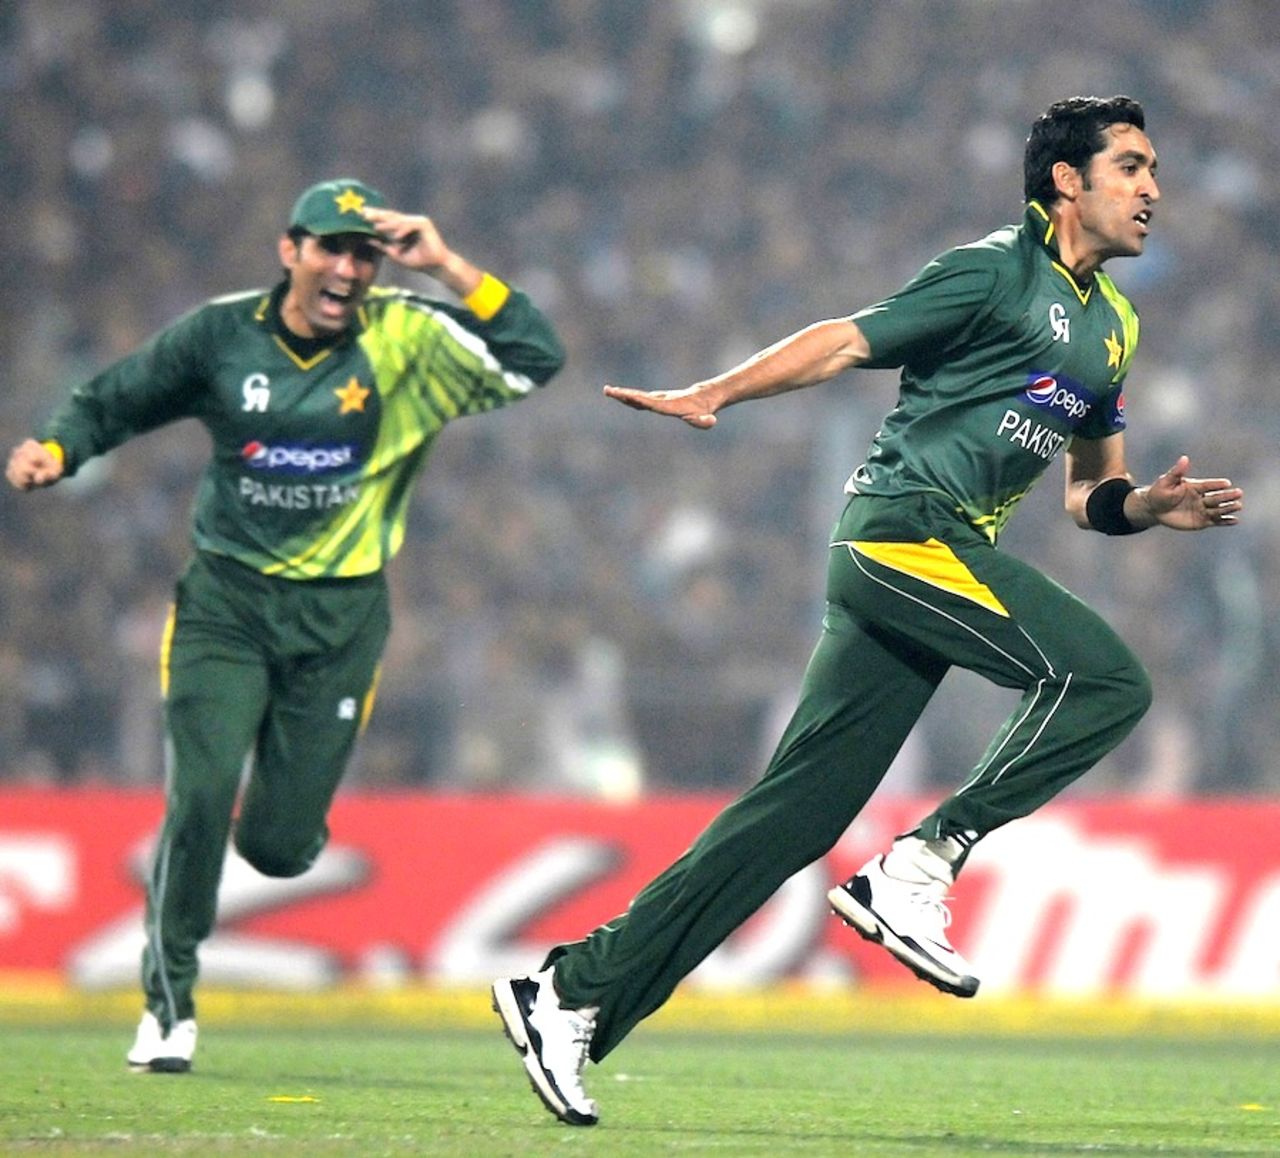 Umar Gul takes off after picking up the wicket of Virender Sehwag, India v Pakistan, 2nd ODI, Kolkata, January 3, 2013